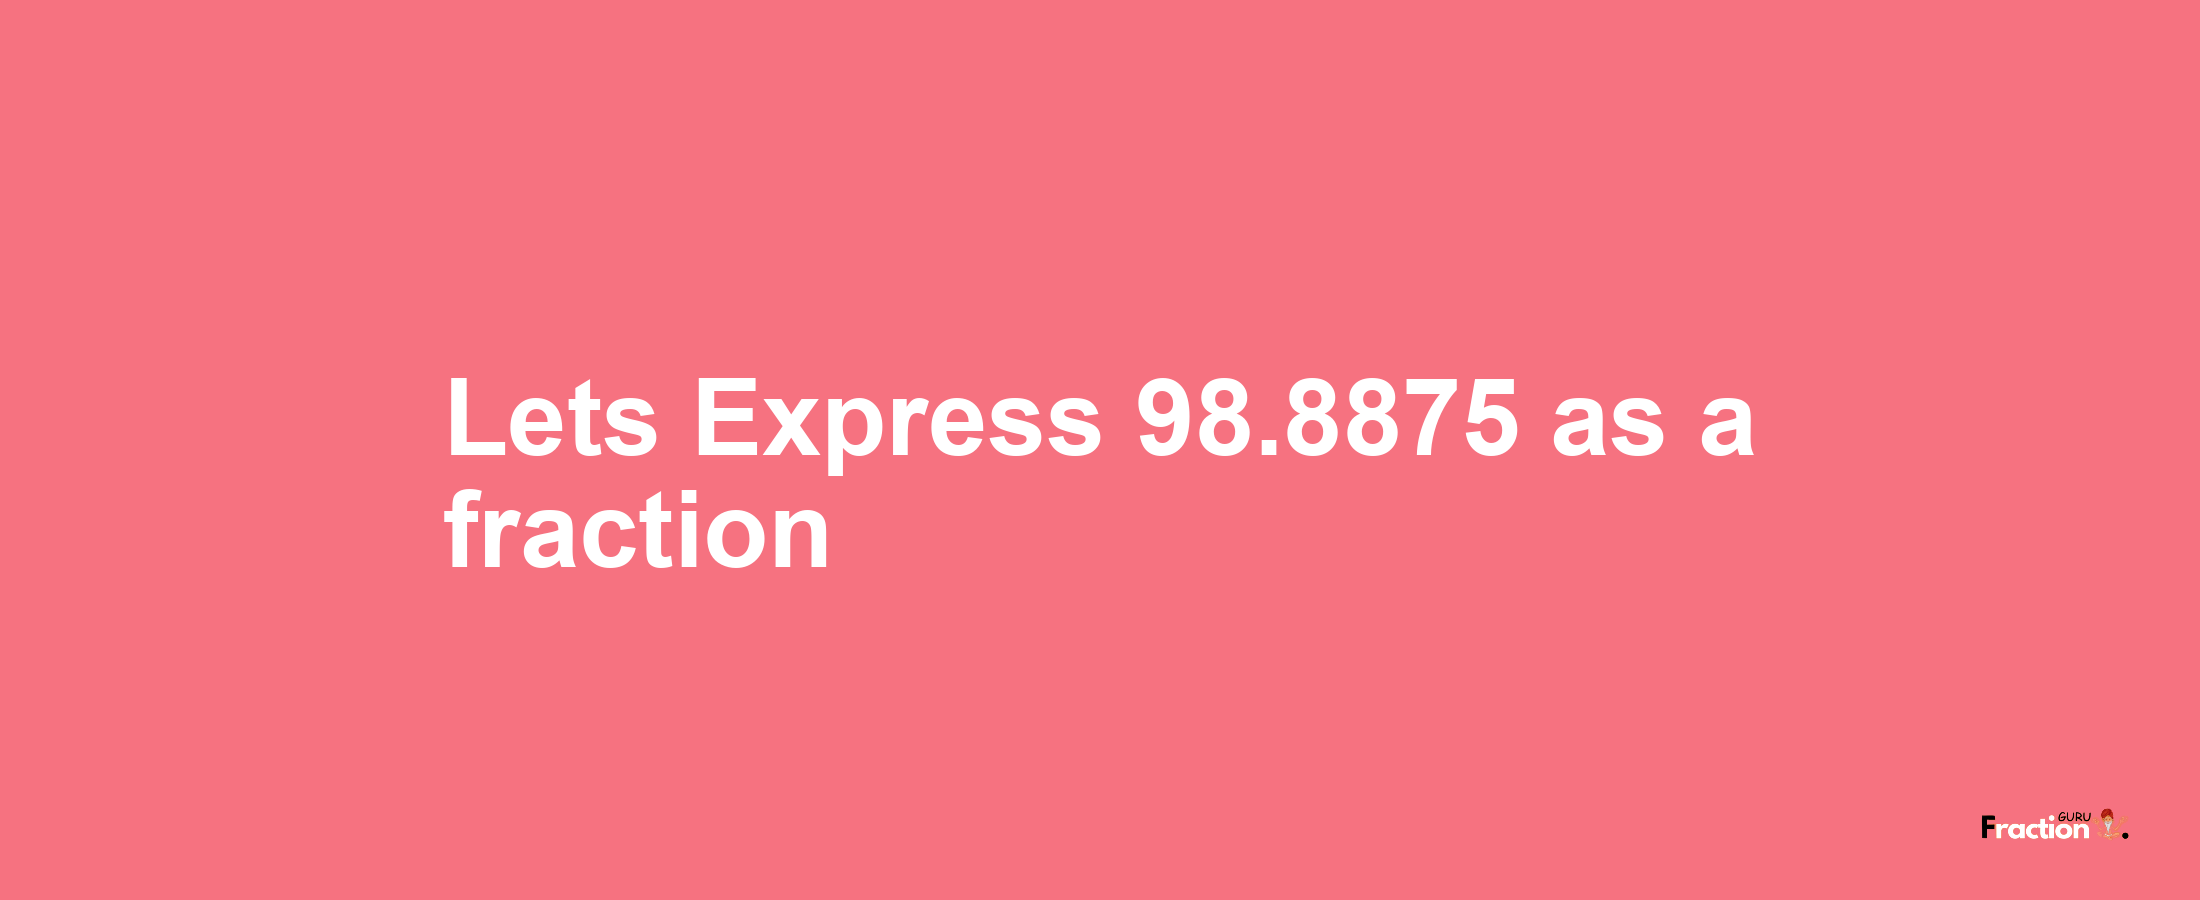 Lets Express 98.8875 as afraction